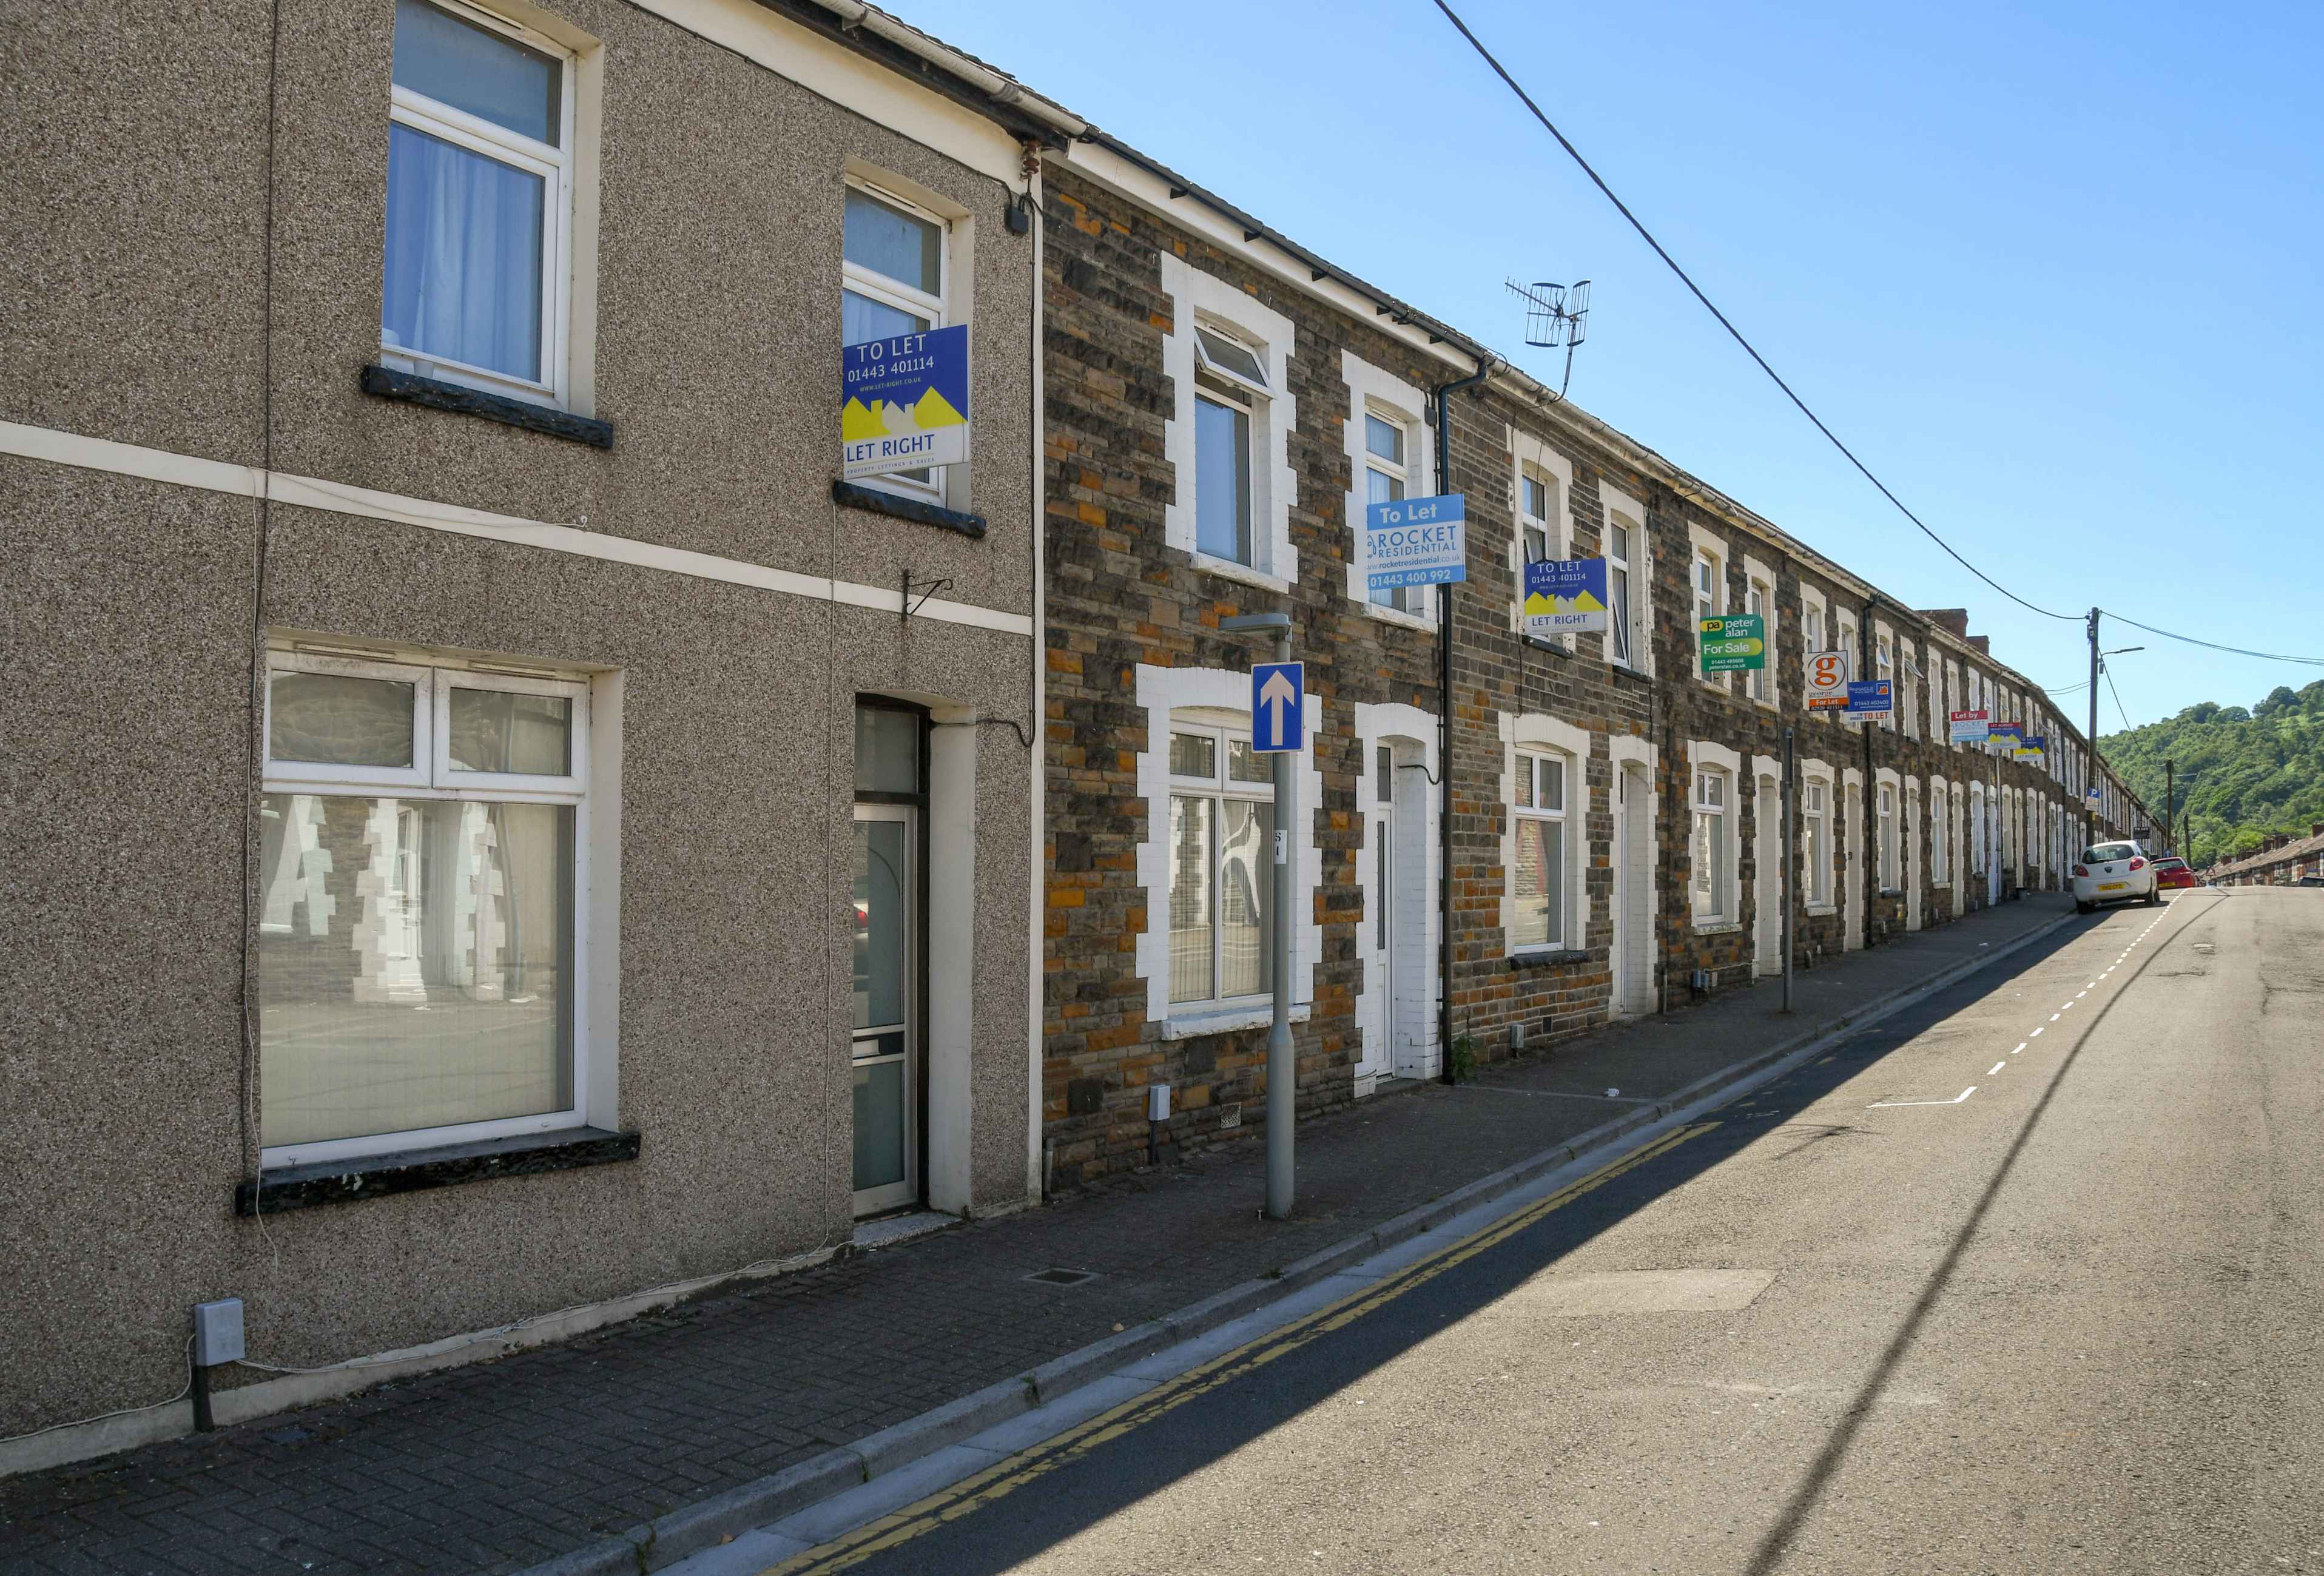 A terraced row of South Wales valleys houses showing ‘to let’ signs.